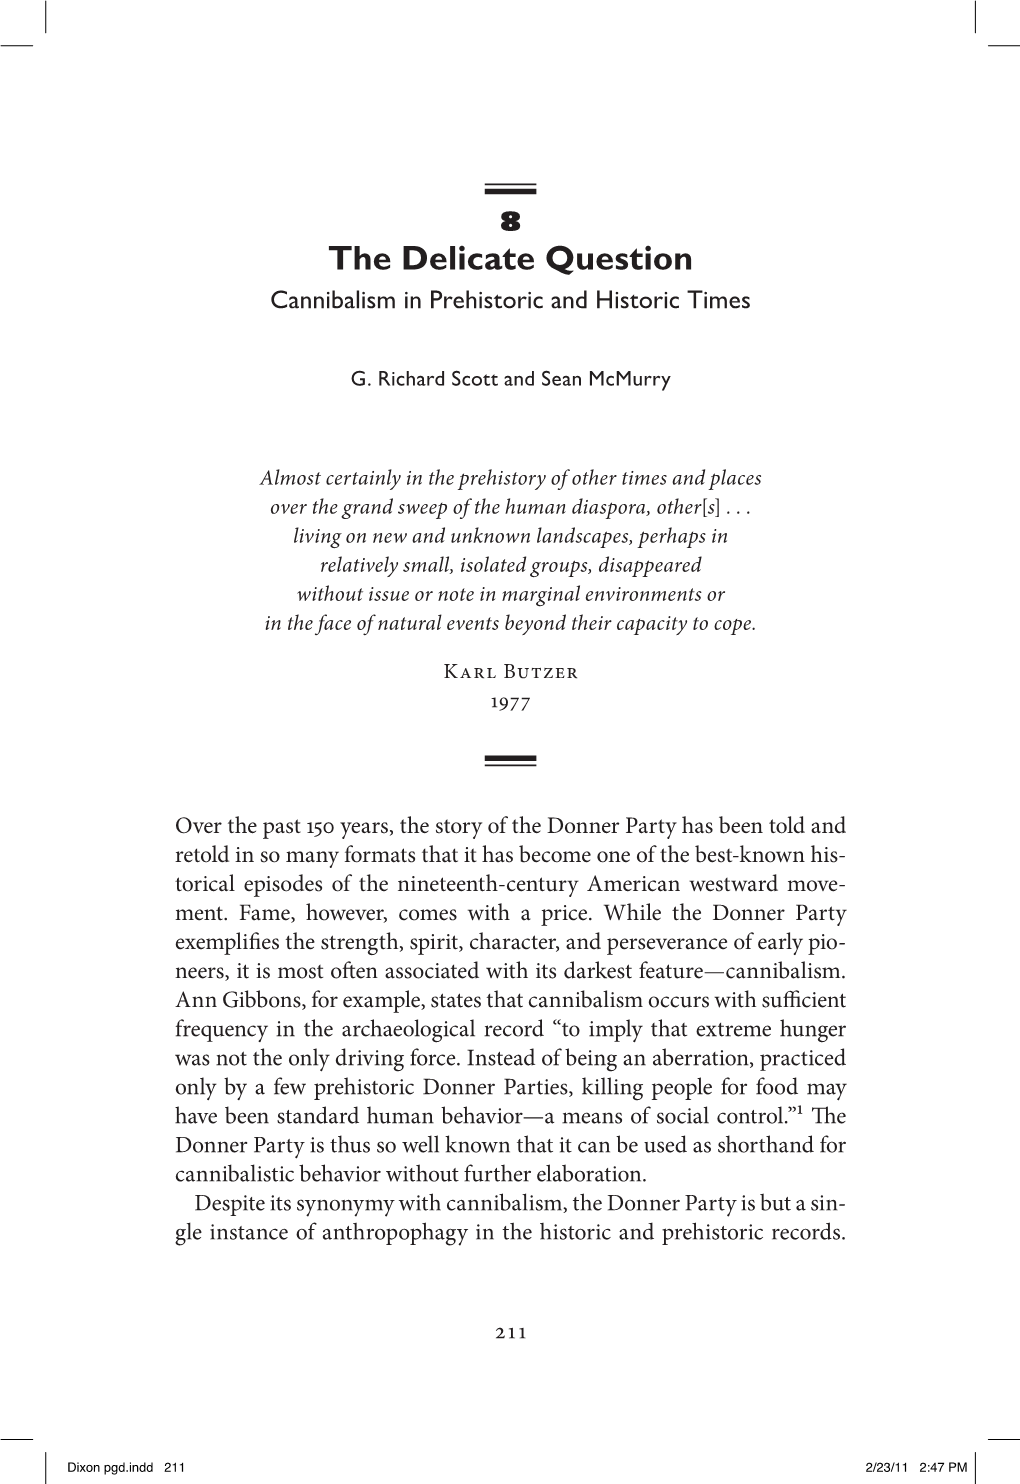 The Delicate Question: Cannibalism in Prehistoric and Historic Times